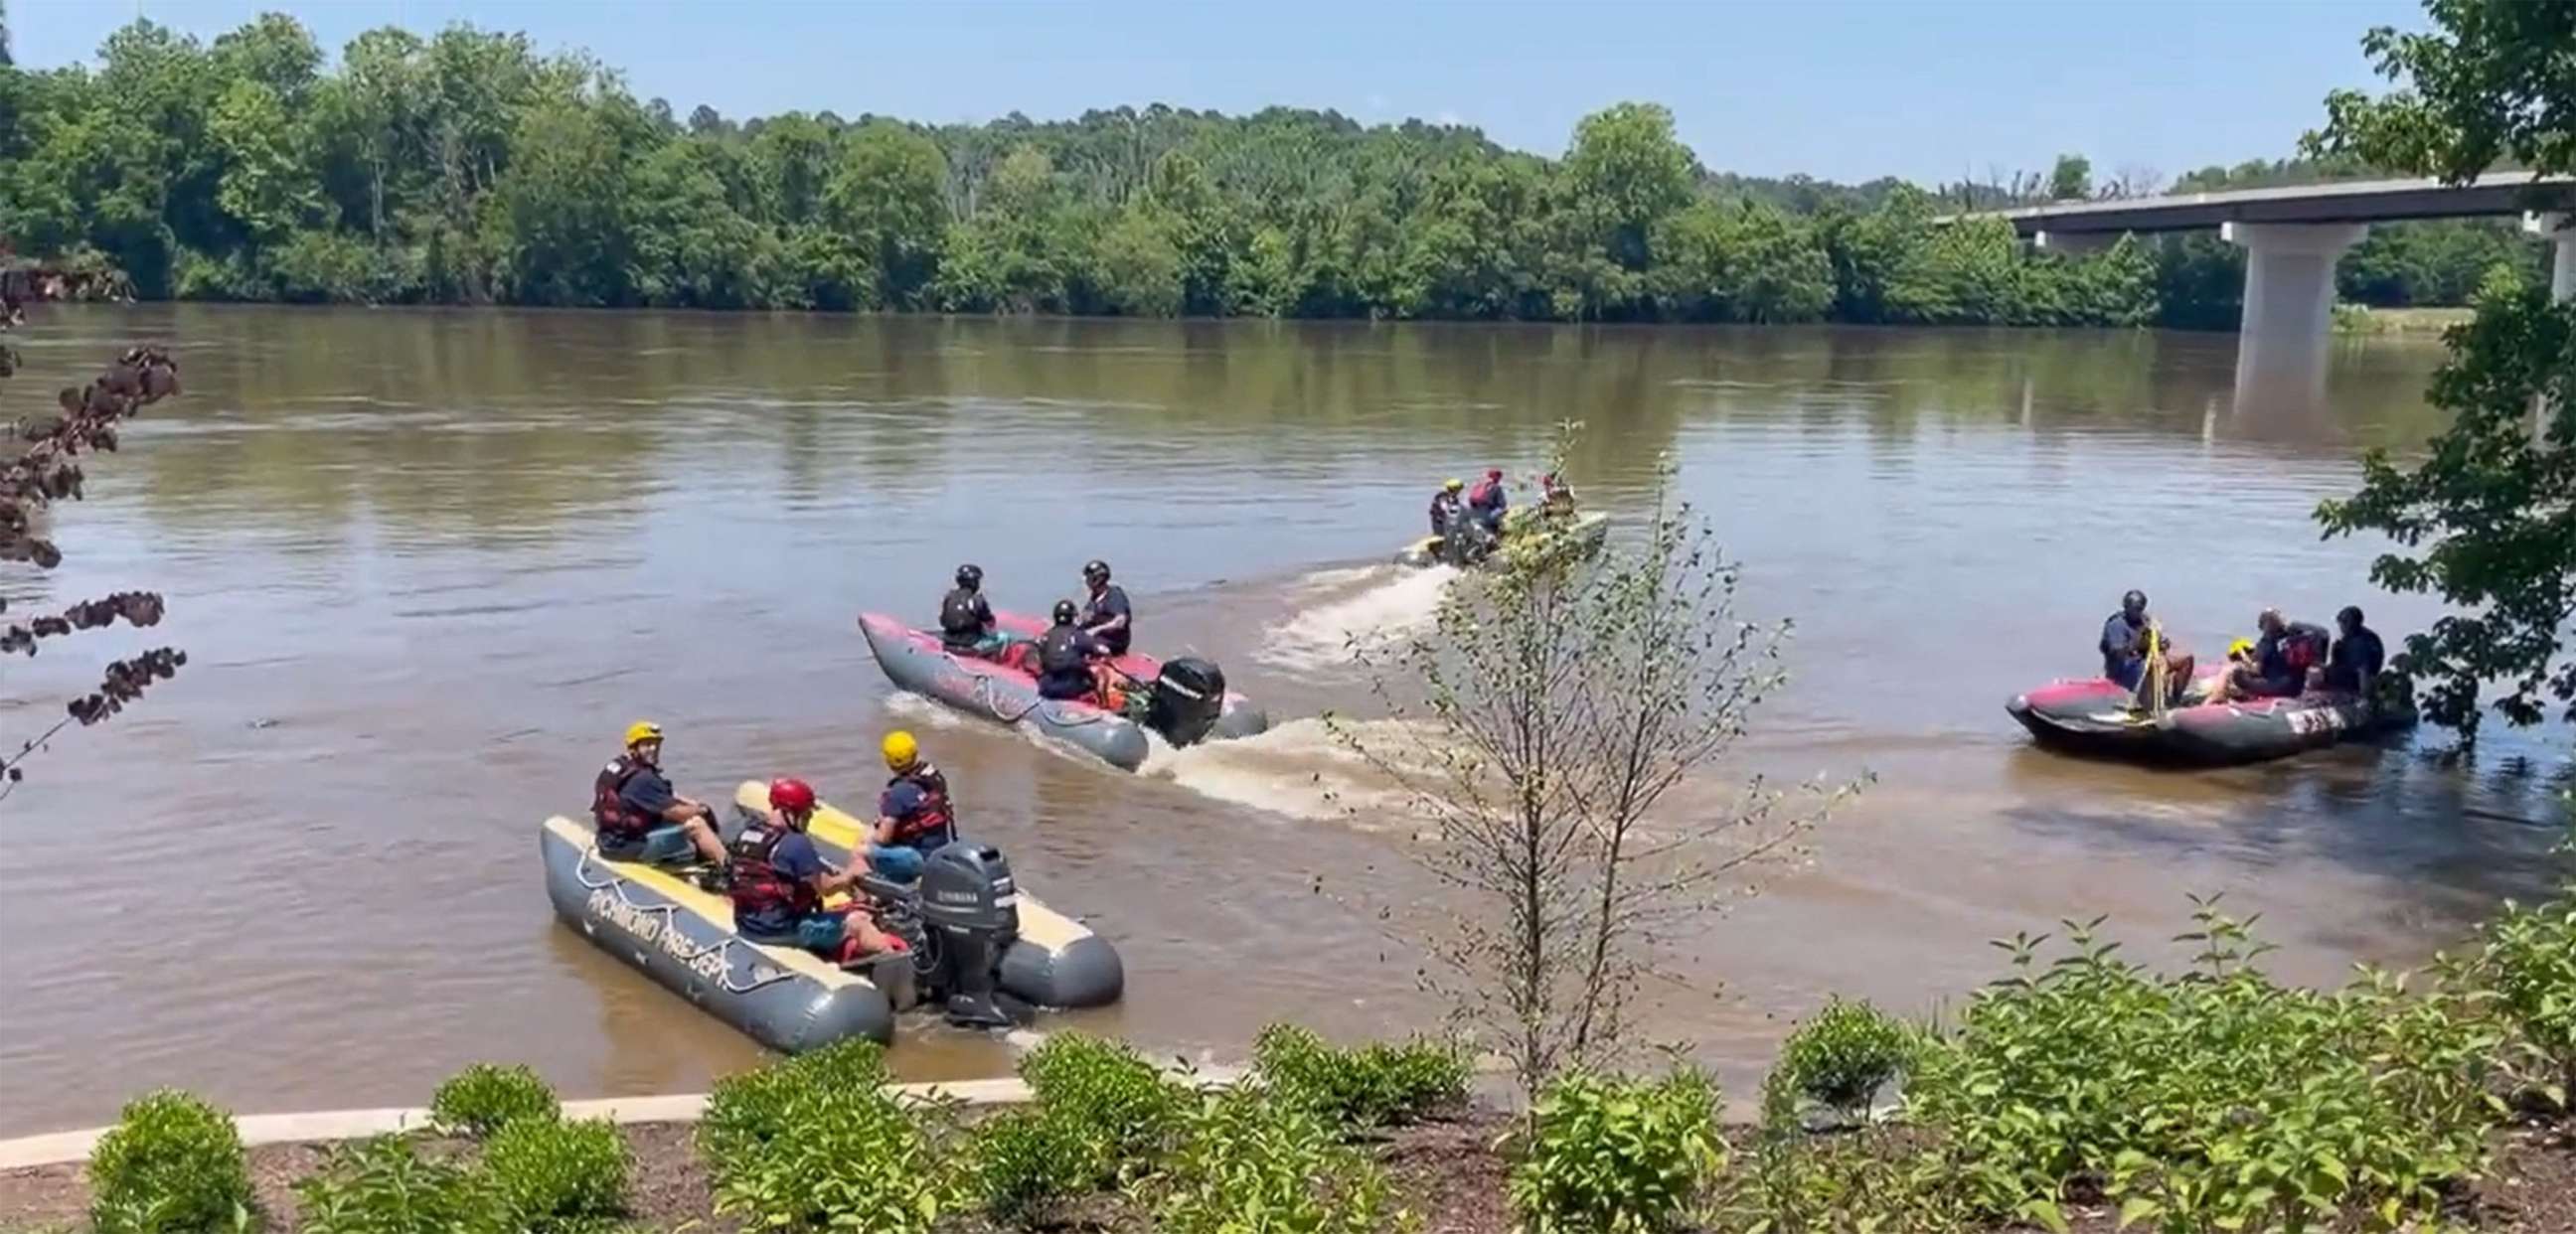 PHOTO: Henrico County Police released video images of crews searching for missing kayakers Lauren E. Winstead of Henrico County and 28-year-old Sarah E. Erway of Chesterfield County in James River in Richmond, Va., May 31, 2022.